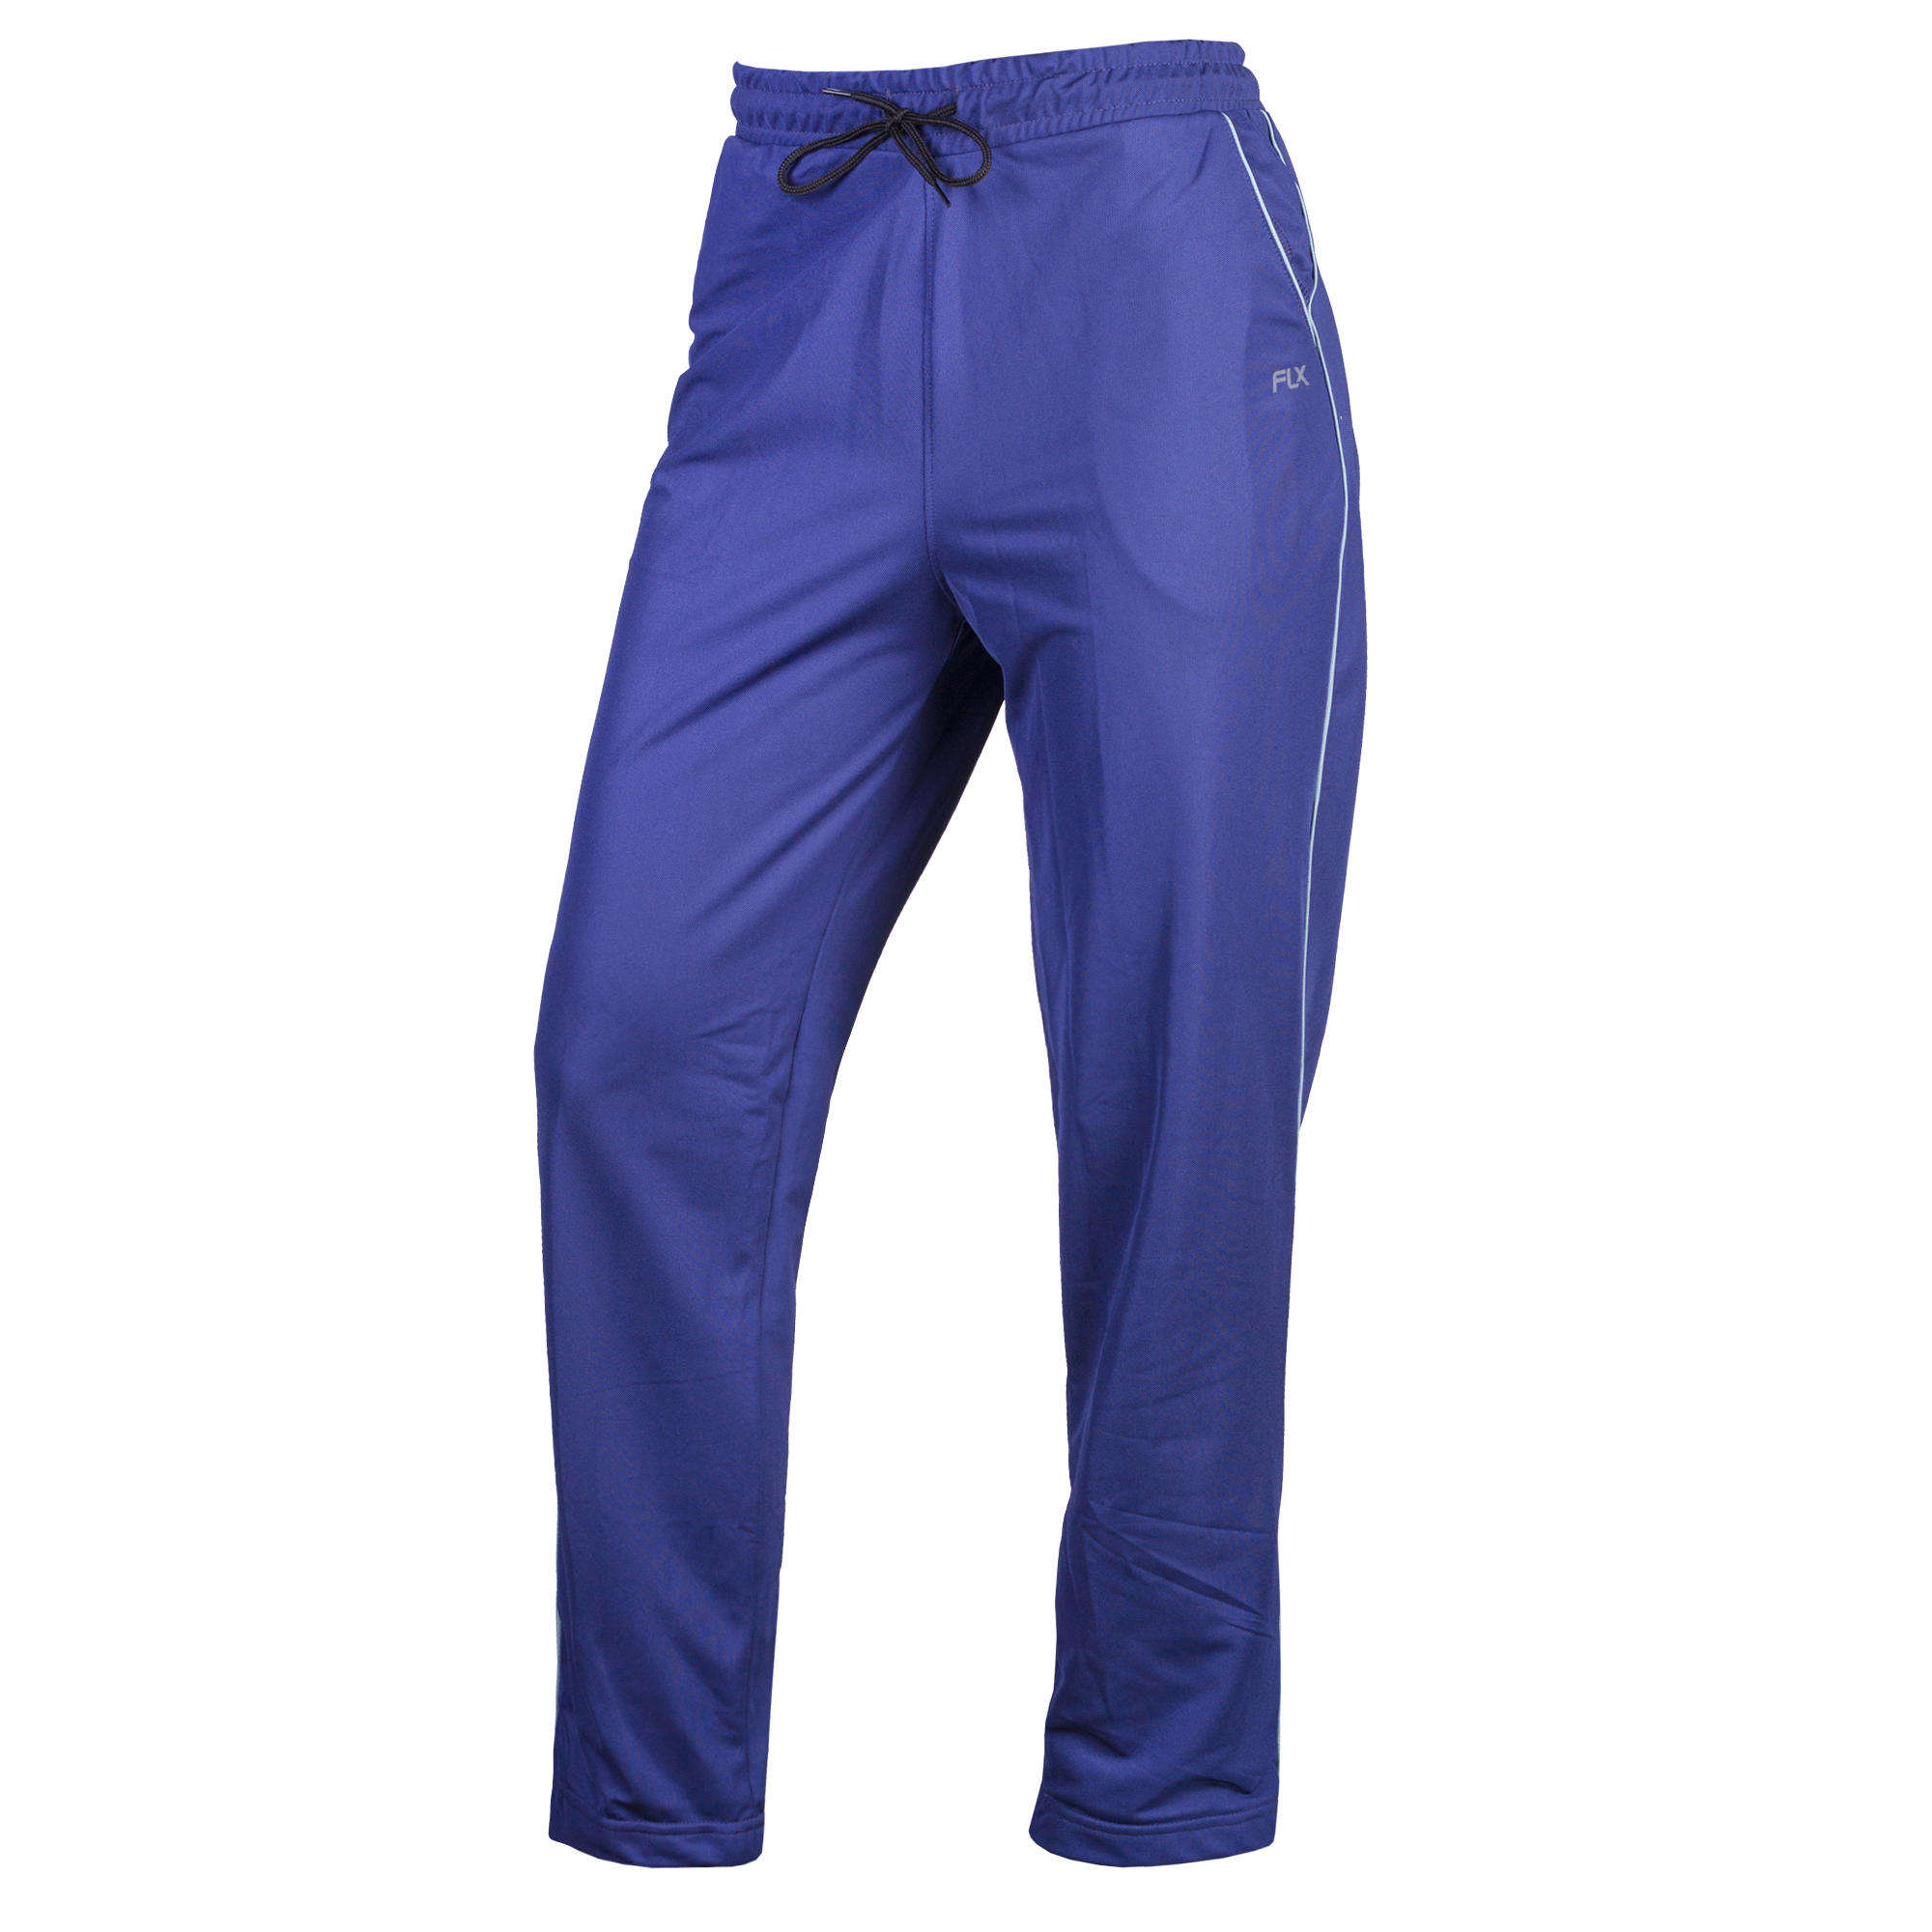 Buy Flx By Decathlon Trackpants Online In India